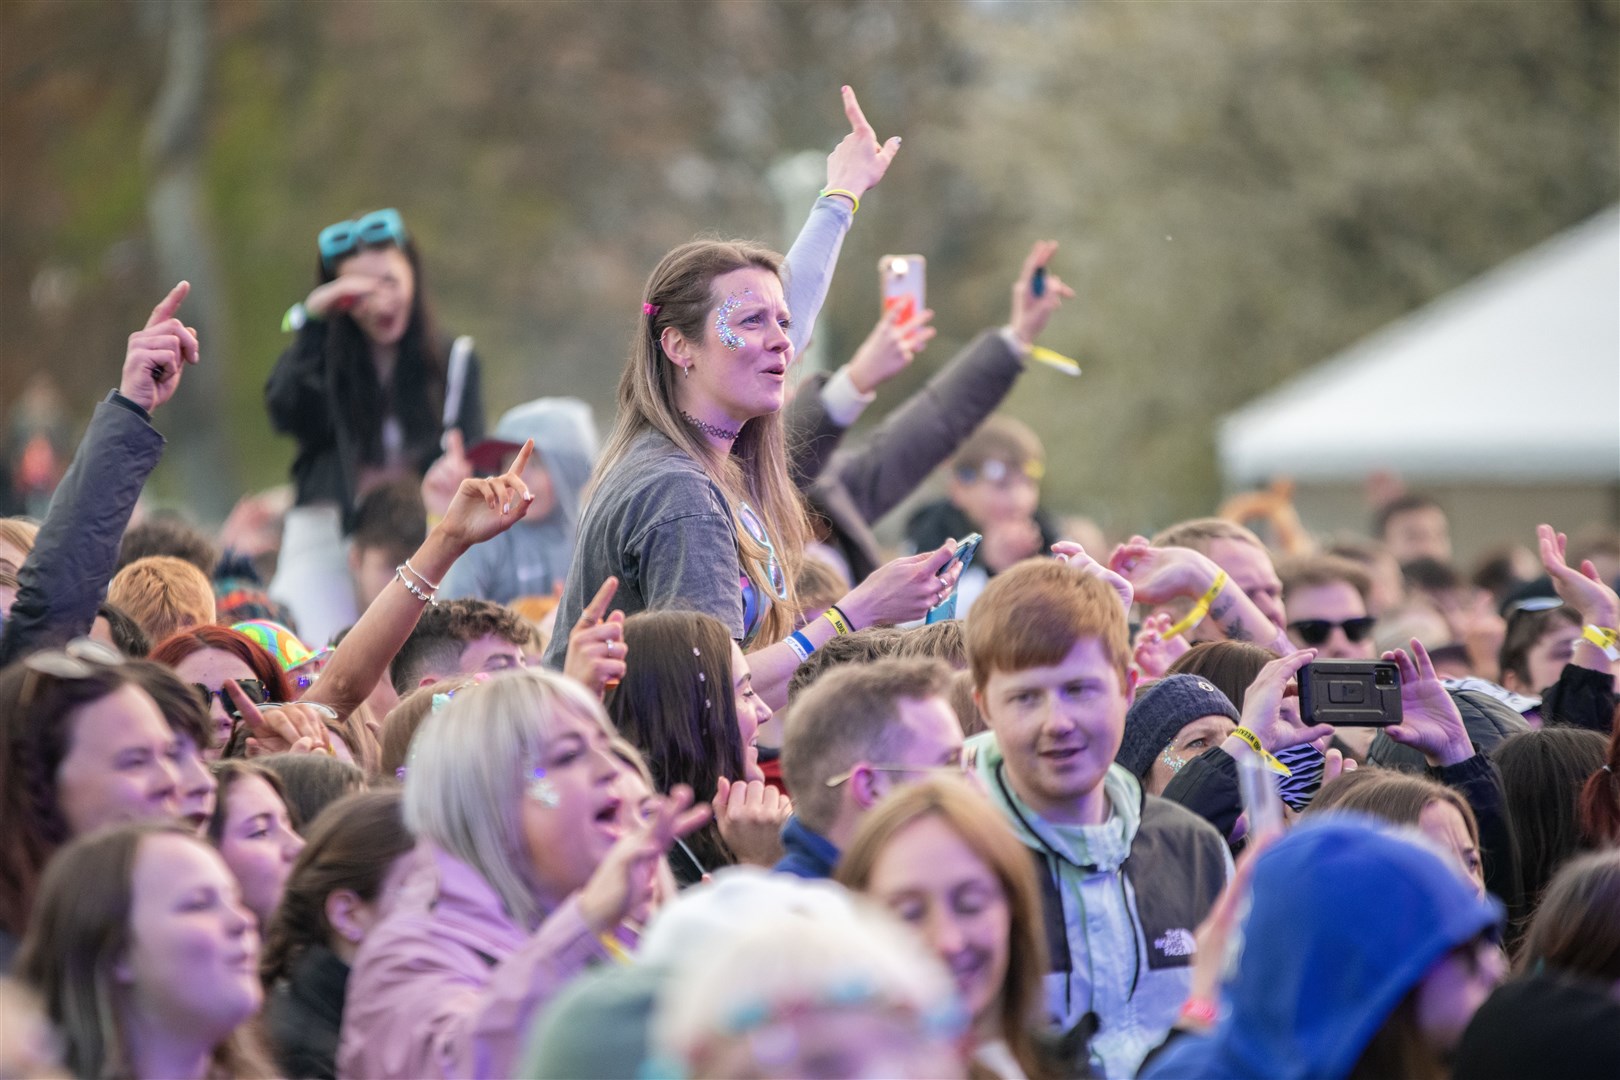 The crowd seemed to thoroughly enjoy their first day at the festival. Picture: Daniel Forsyth